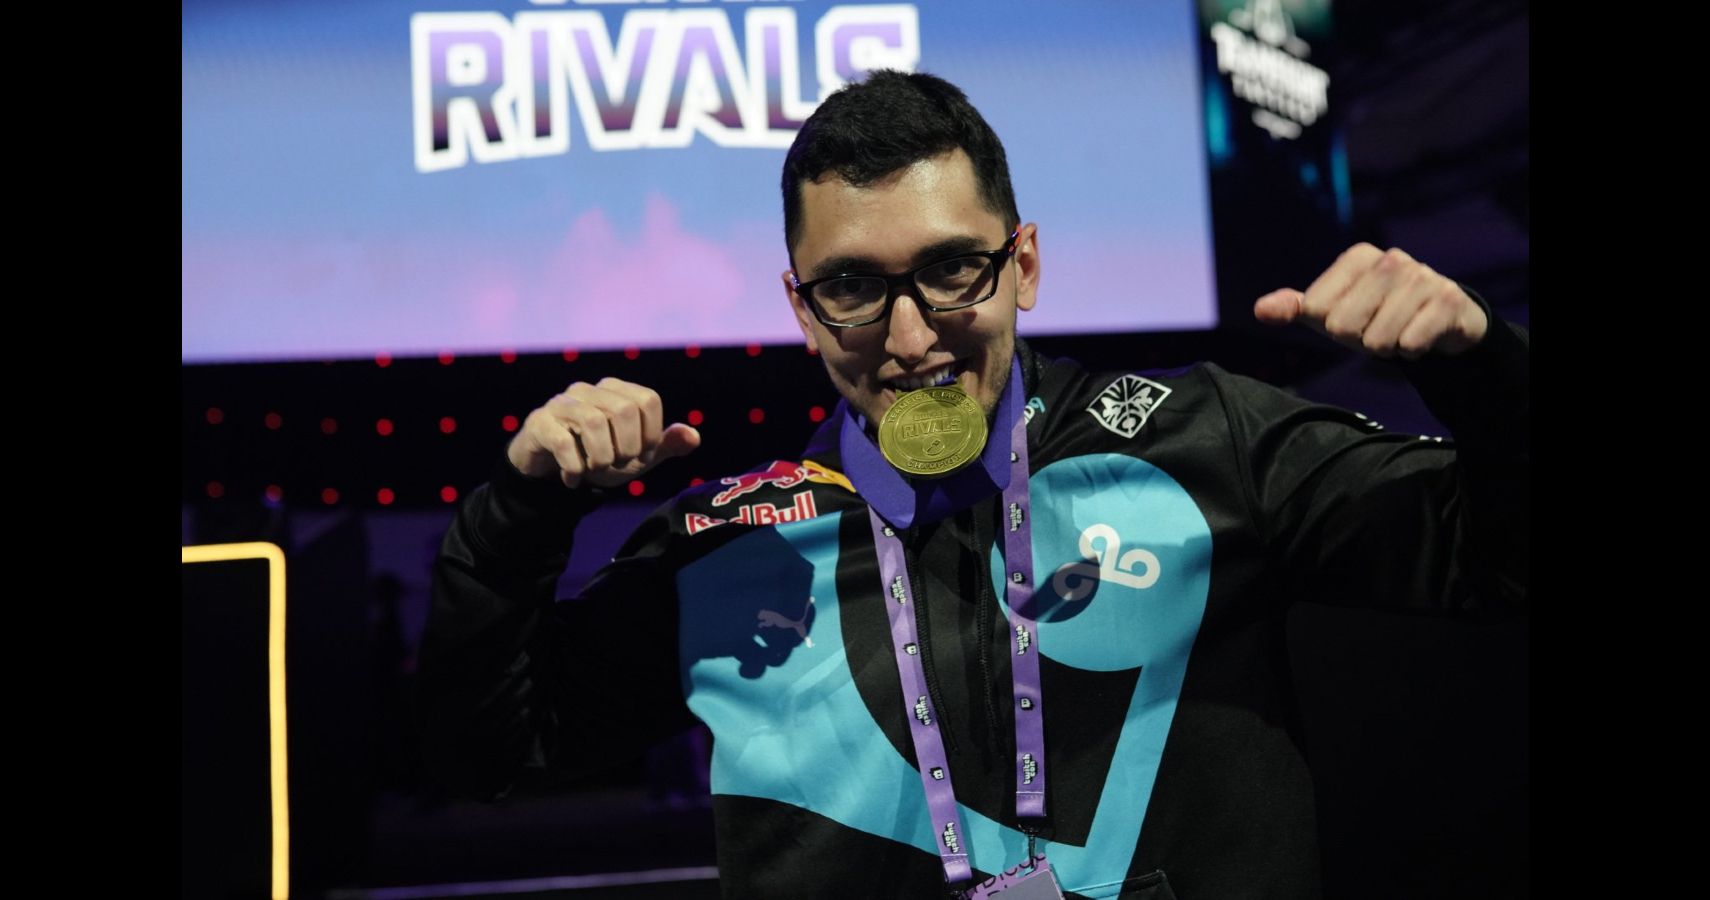 Who is Jschritte A Look at the Teamfight Tactics Twitch Rivals Underdog Champion